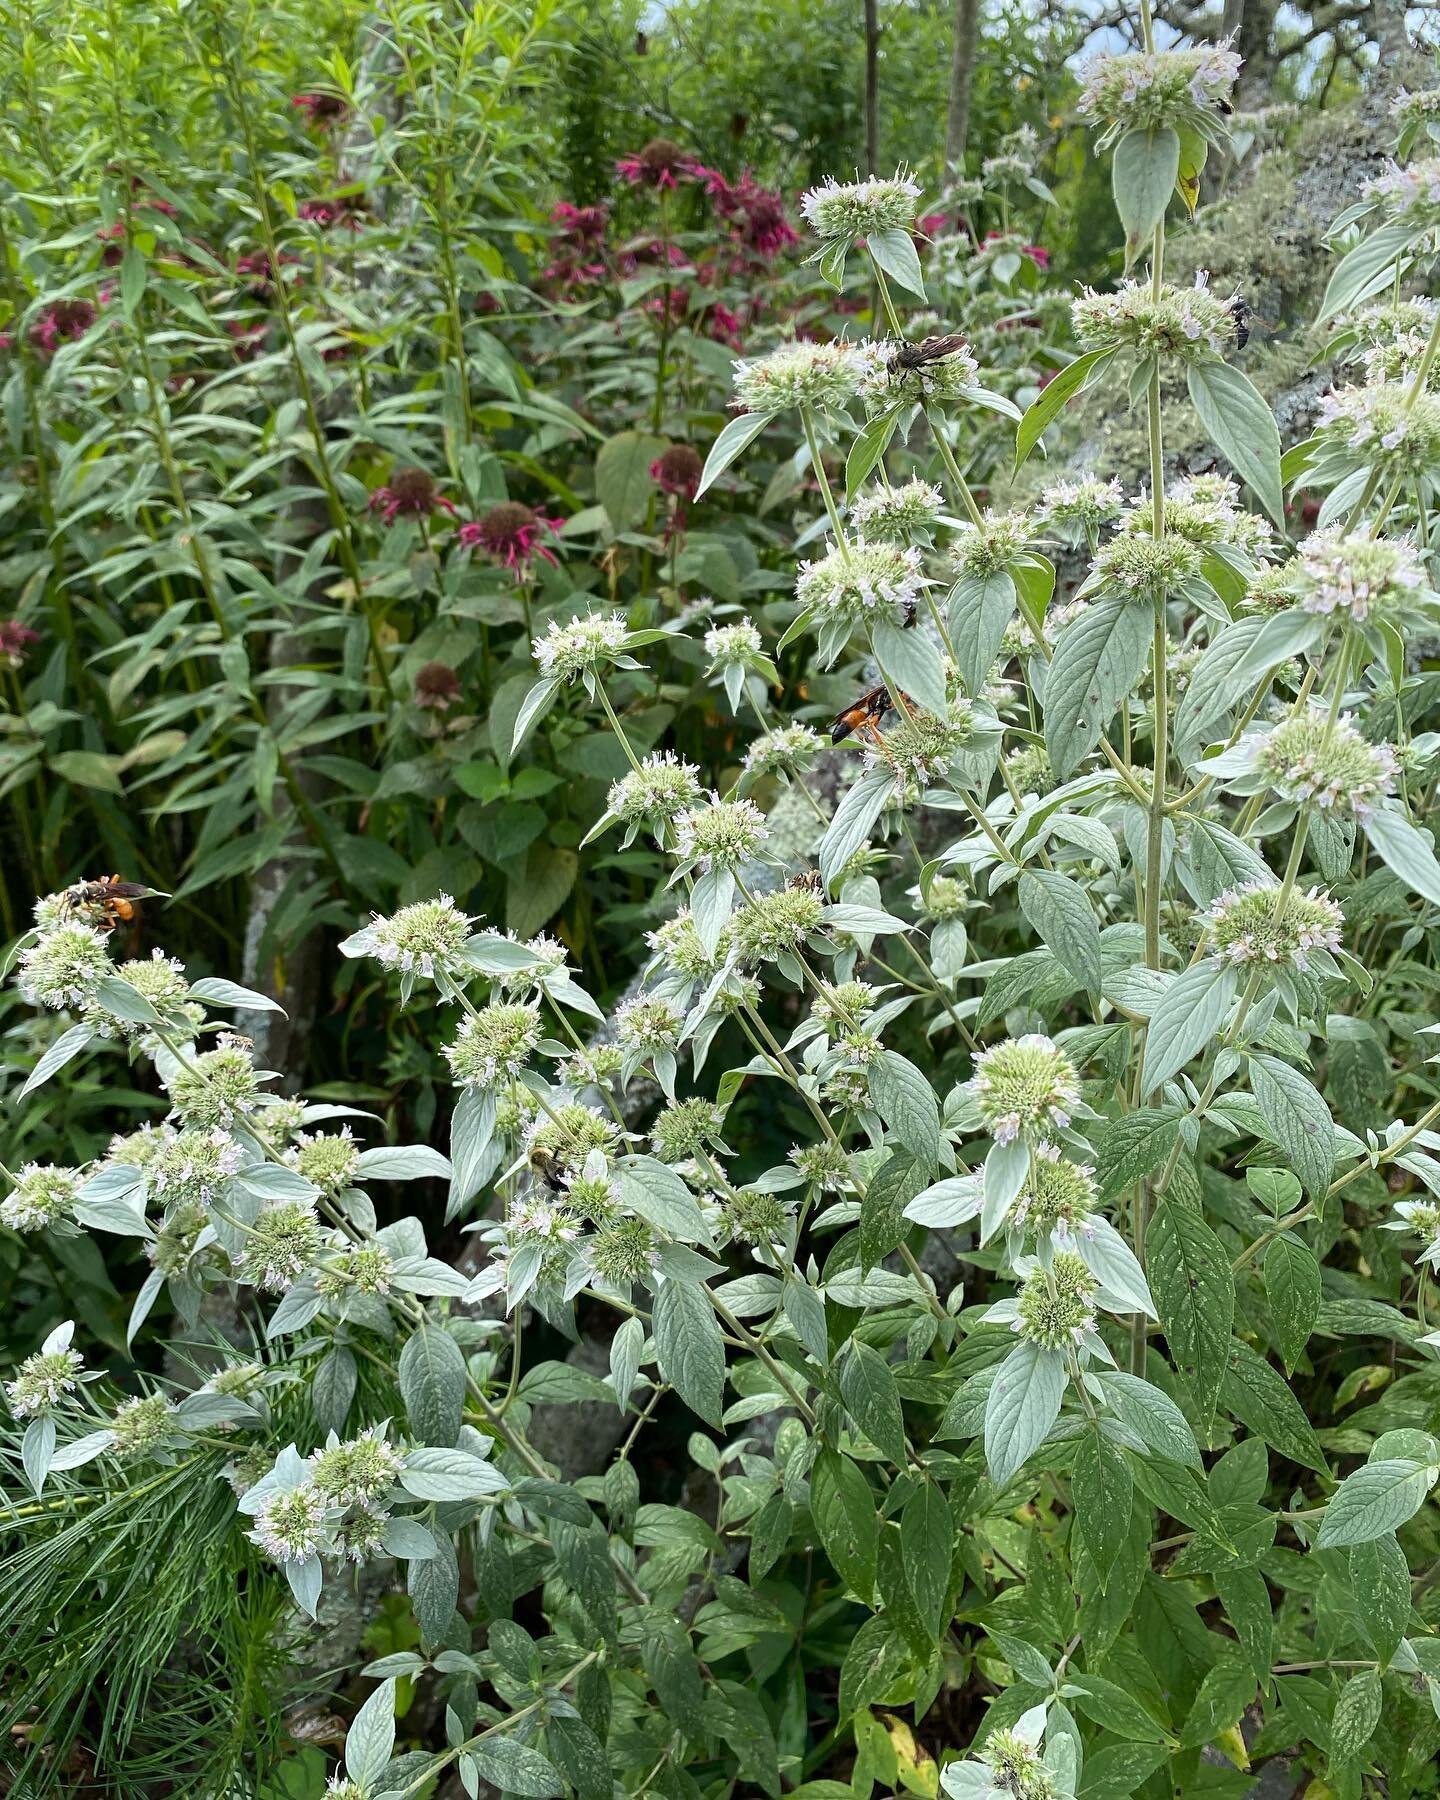 Incredible pollinator plant-mountain mint. Too hard to count all the different bees, wasps, and butterflies buzzing away. And a few more before and afters. Enjoy!